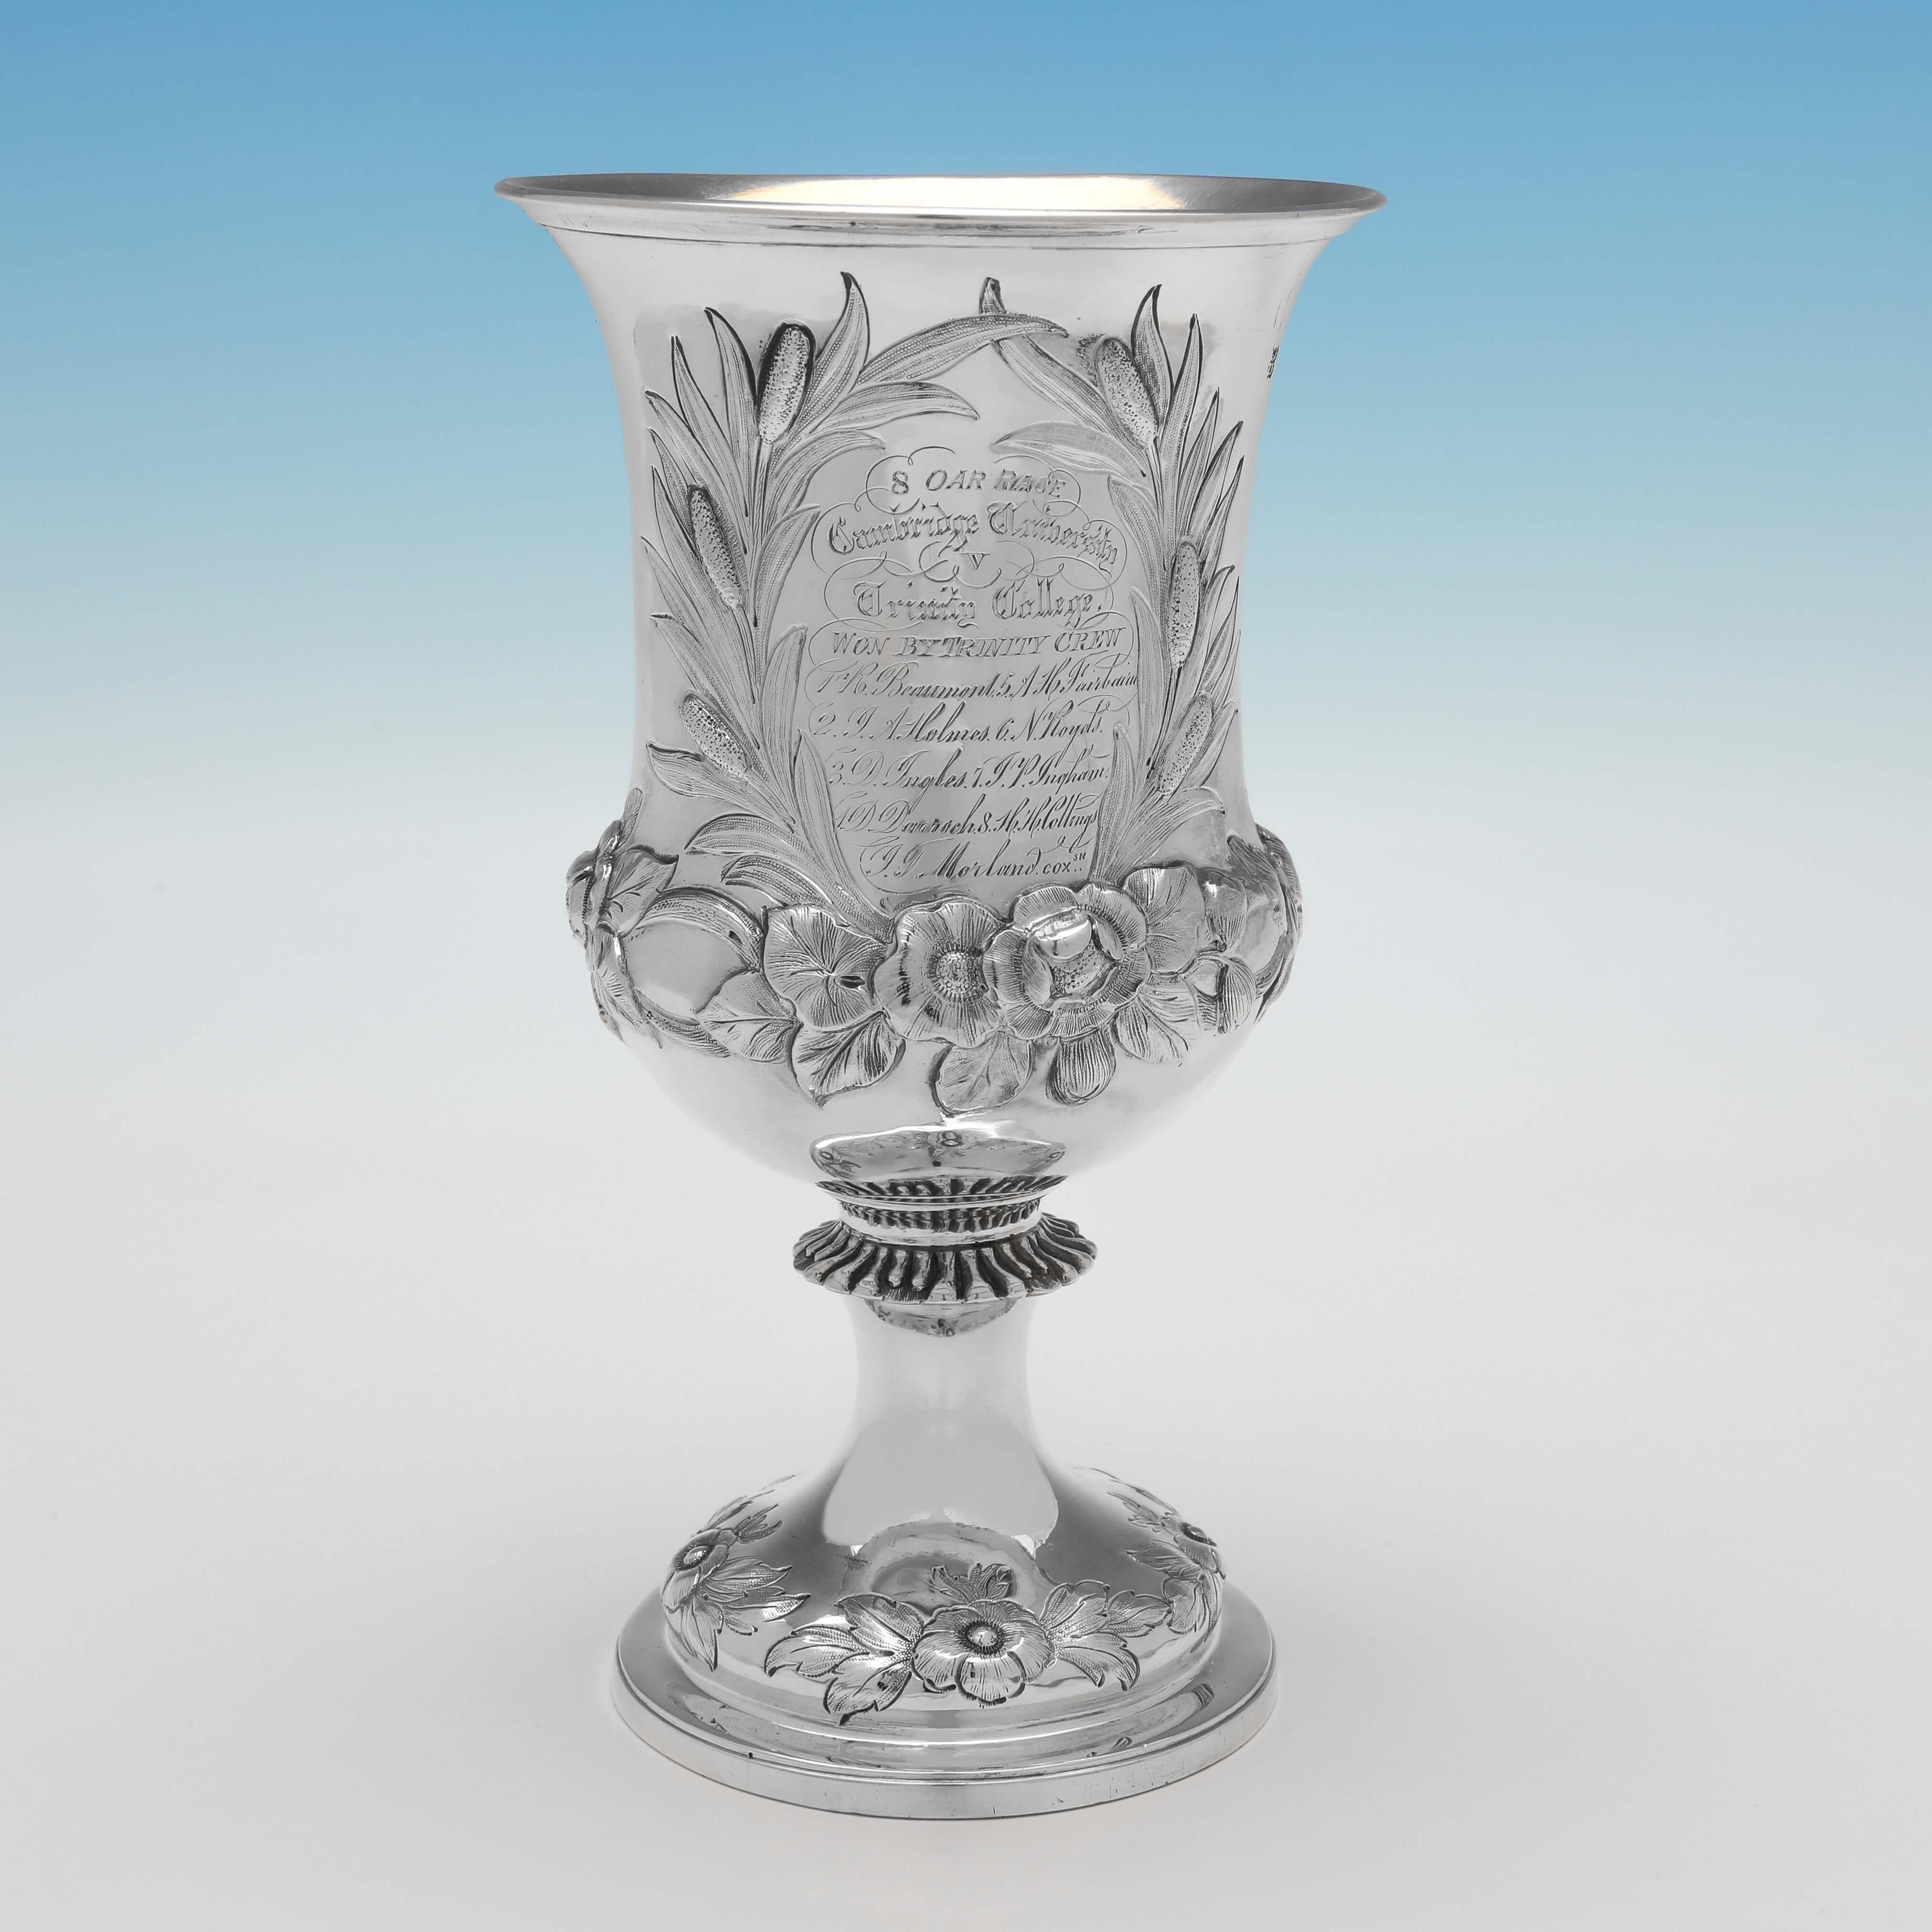 Hallmarked in London in 1857 by George Richards, this striking, Victorian, Antique Sterling Silver Goblet, is campagna shaped, and features applied decoration. The goblet measures 6.75